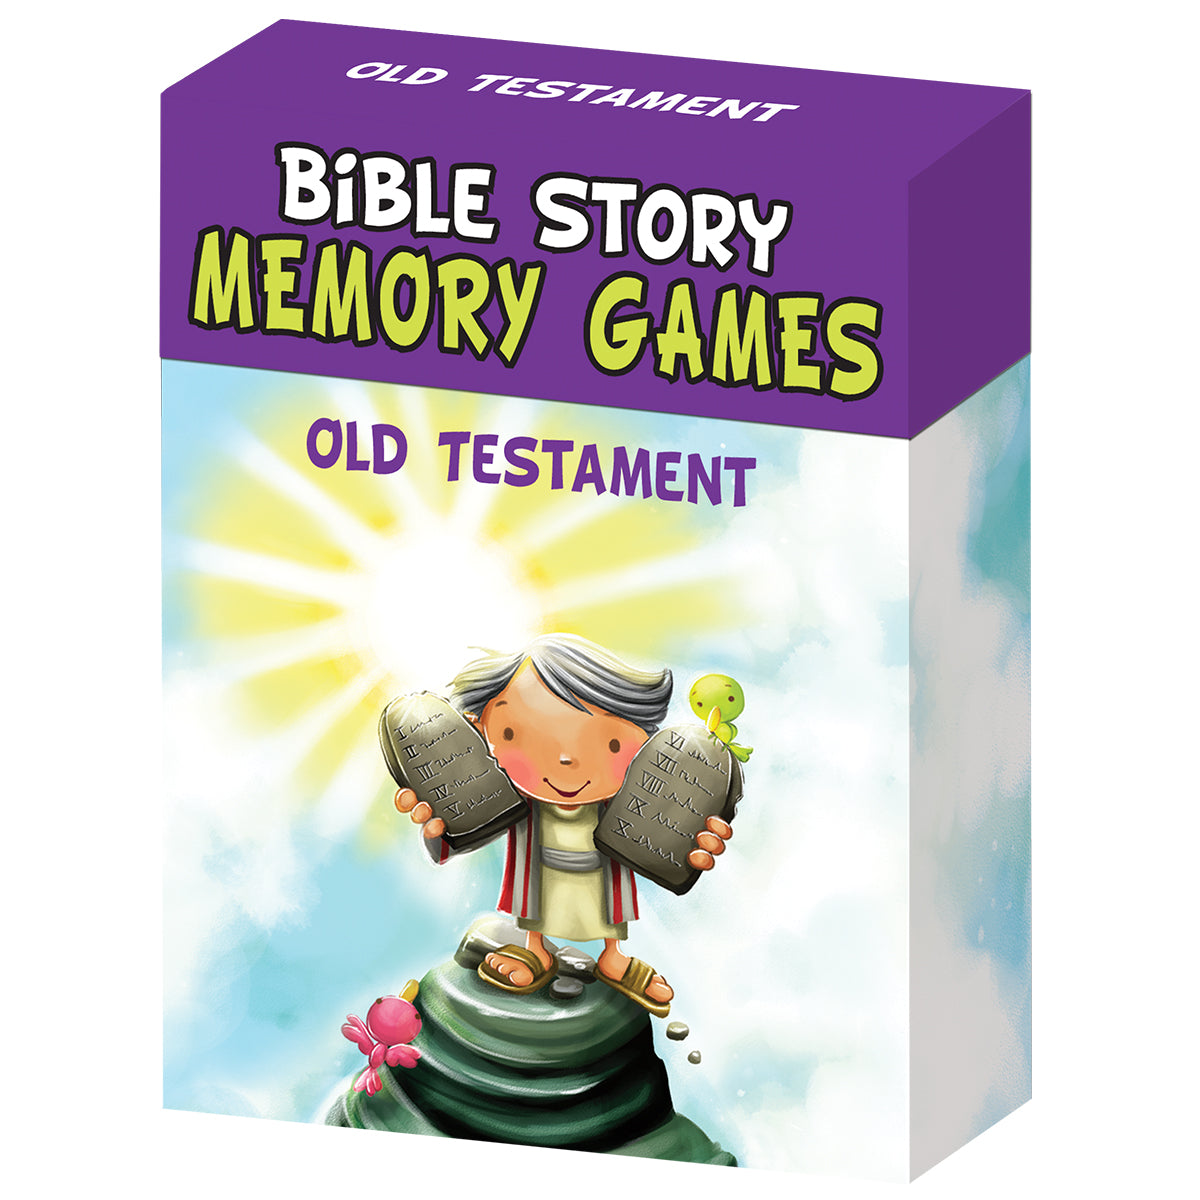 Image of Bible Story Memory Games Old Testament other